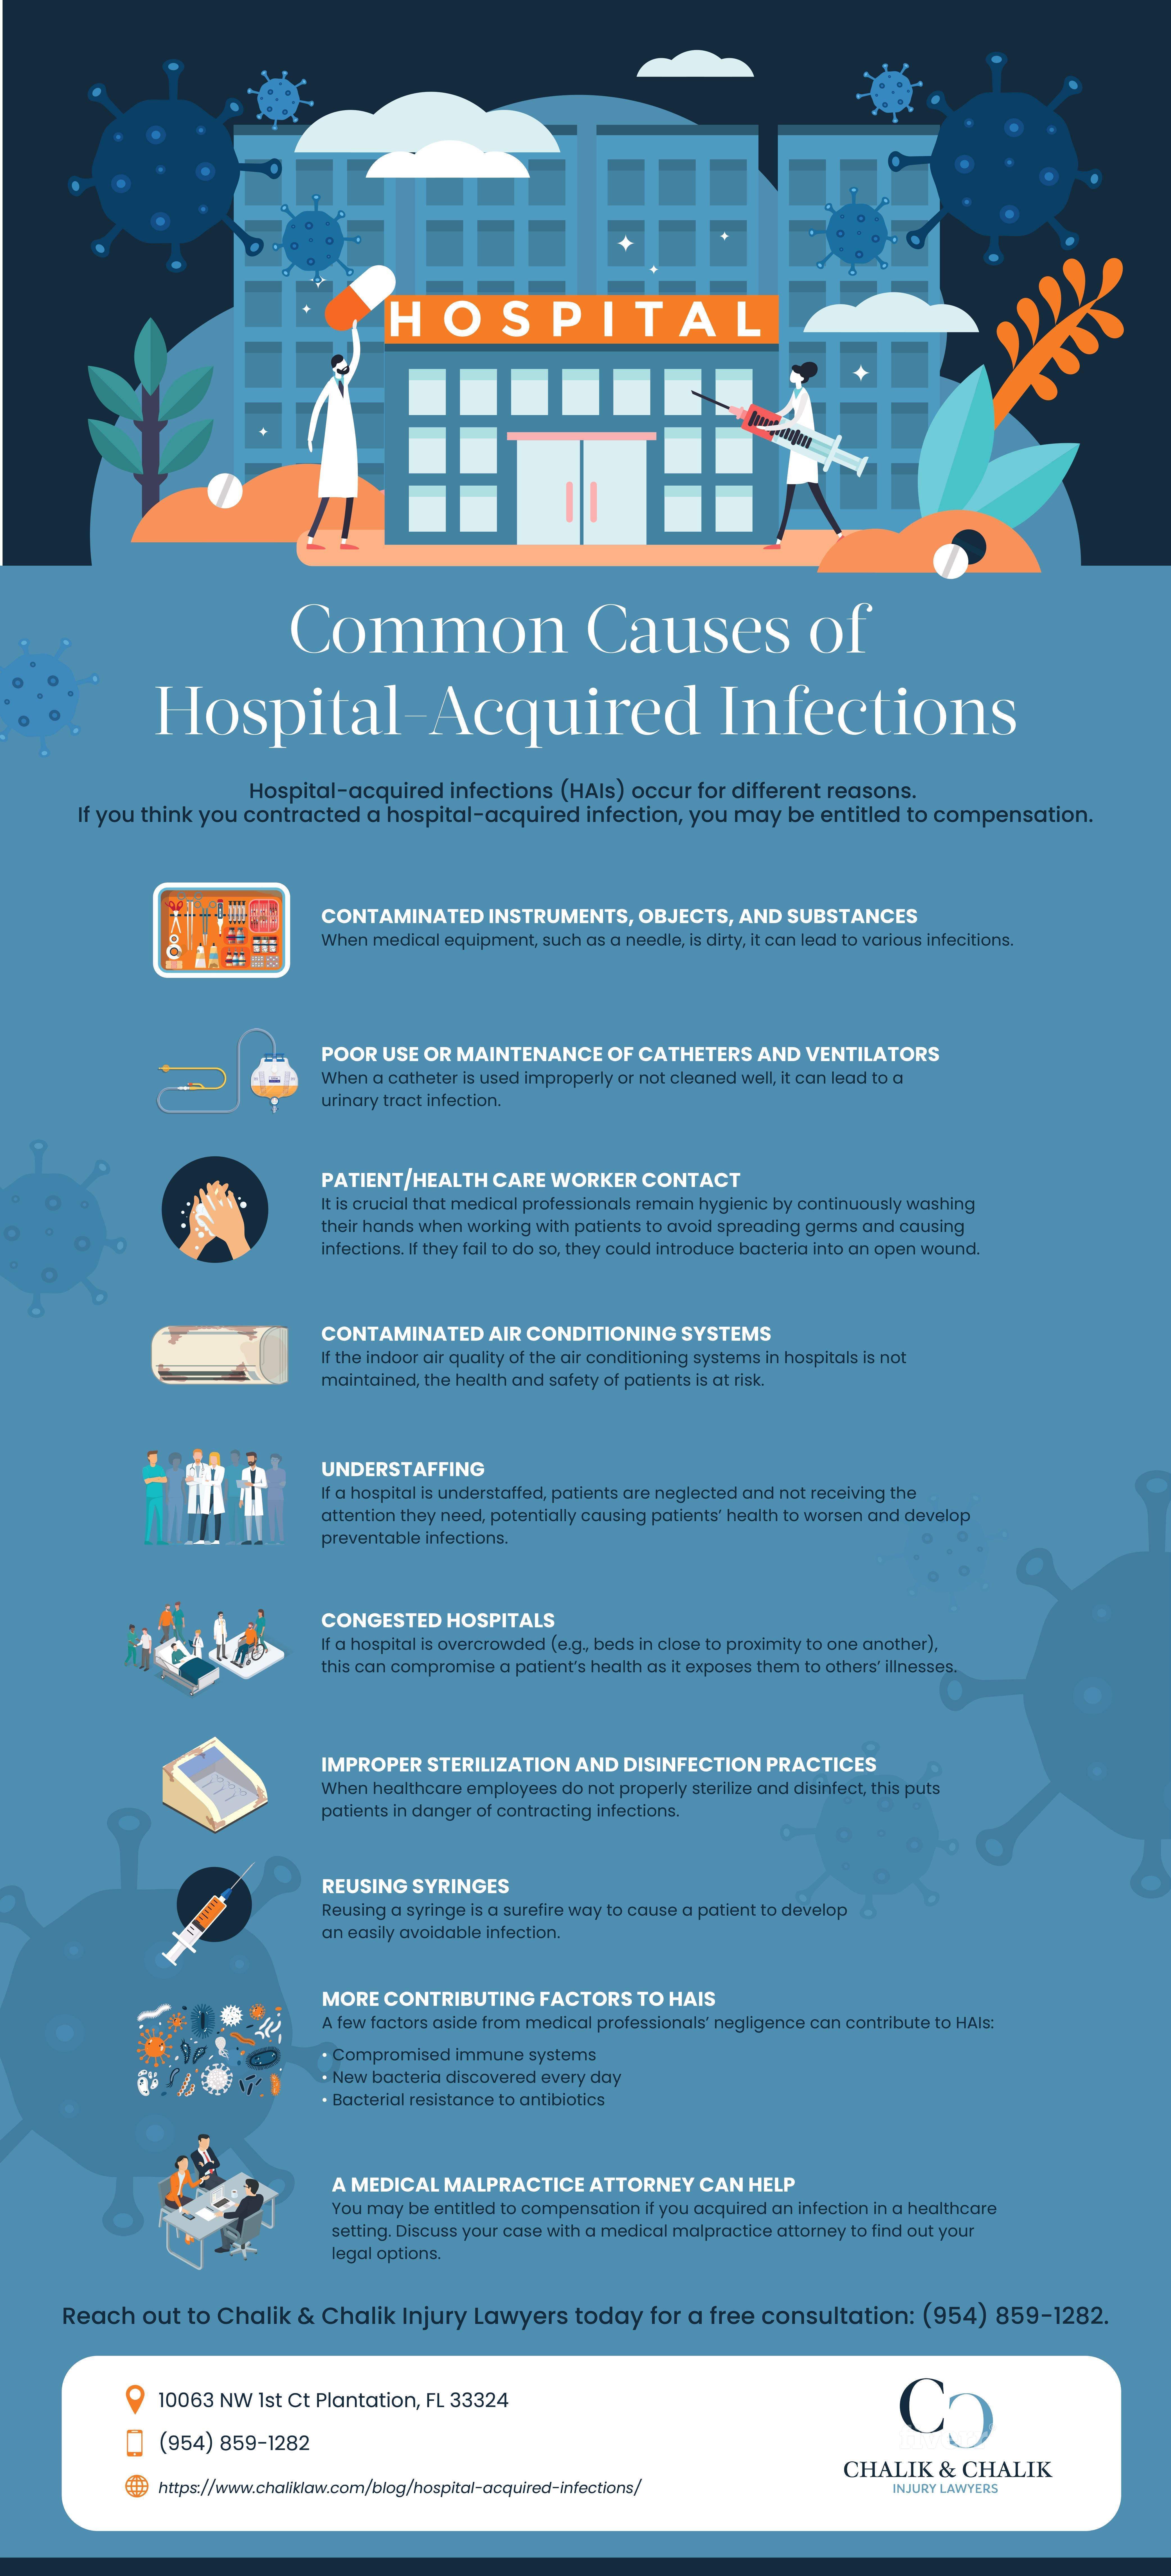 Common Causes of Hospital-Acquired Infections